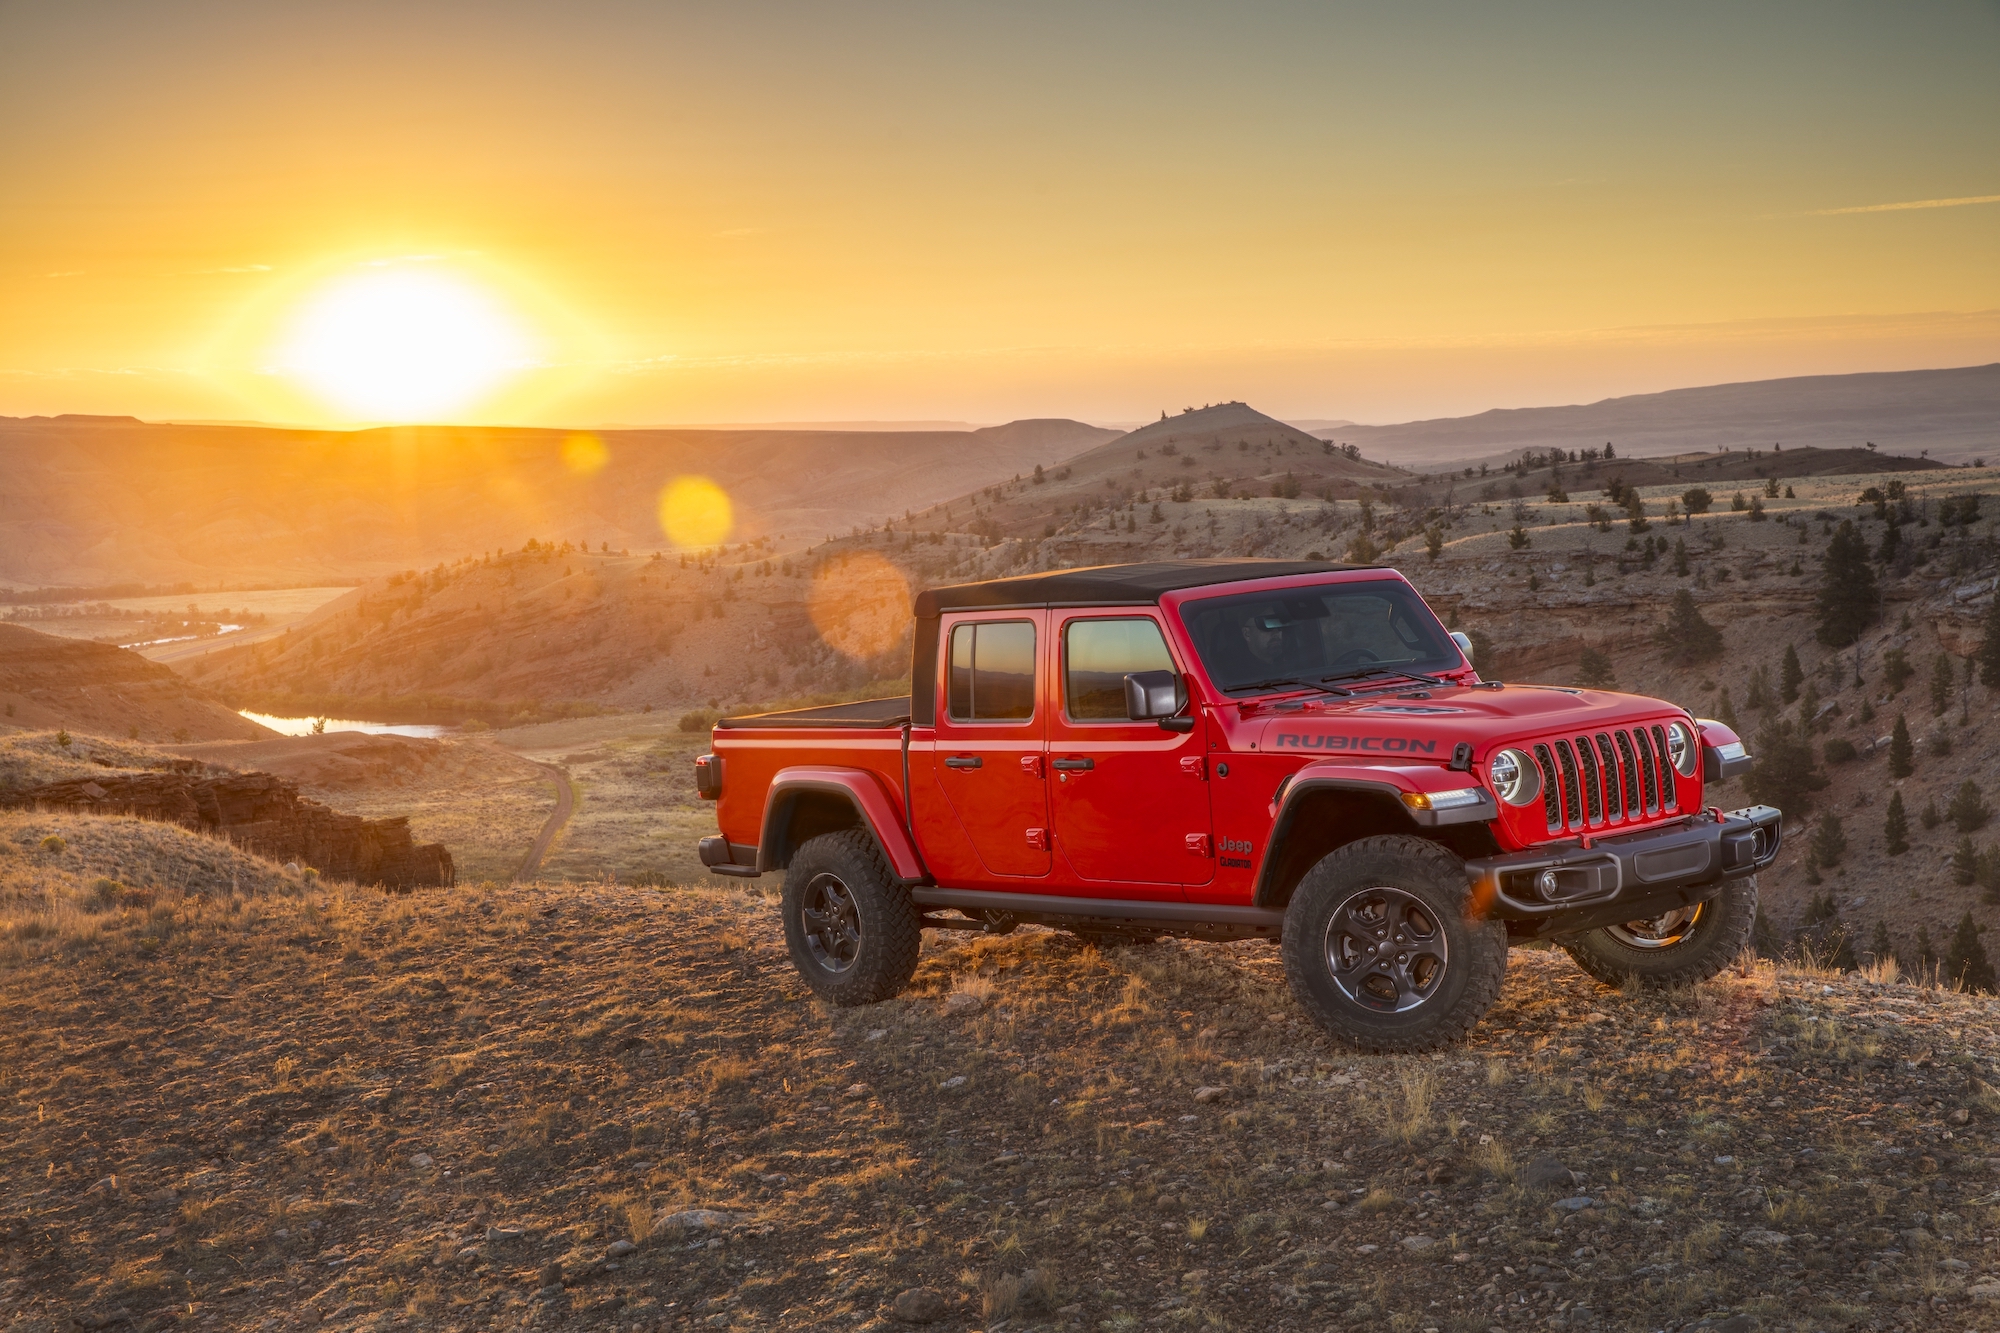 The 2021 Jeep Gladiator Rubicon beat out Ford in Consumer Reports' truck rankings